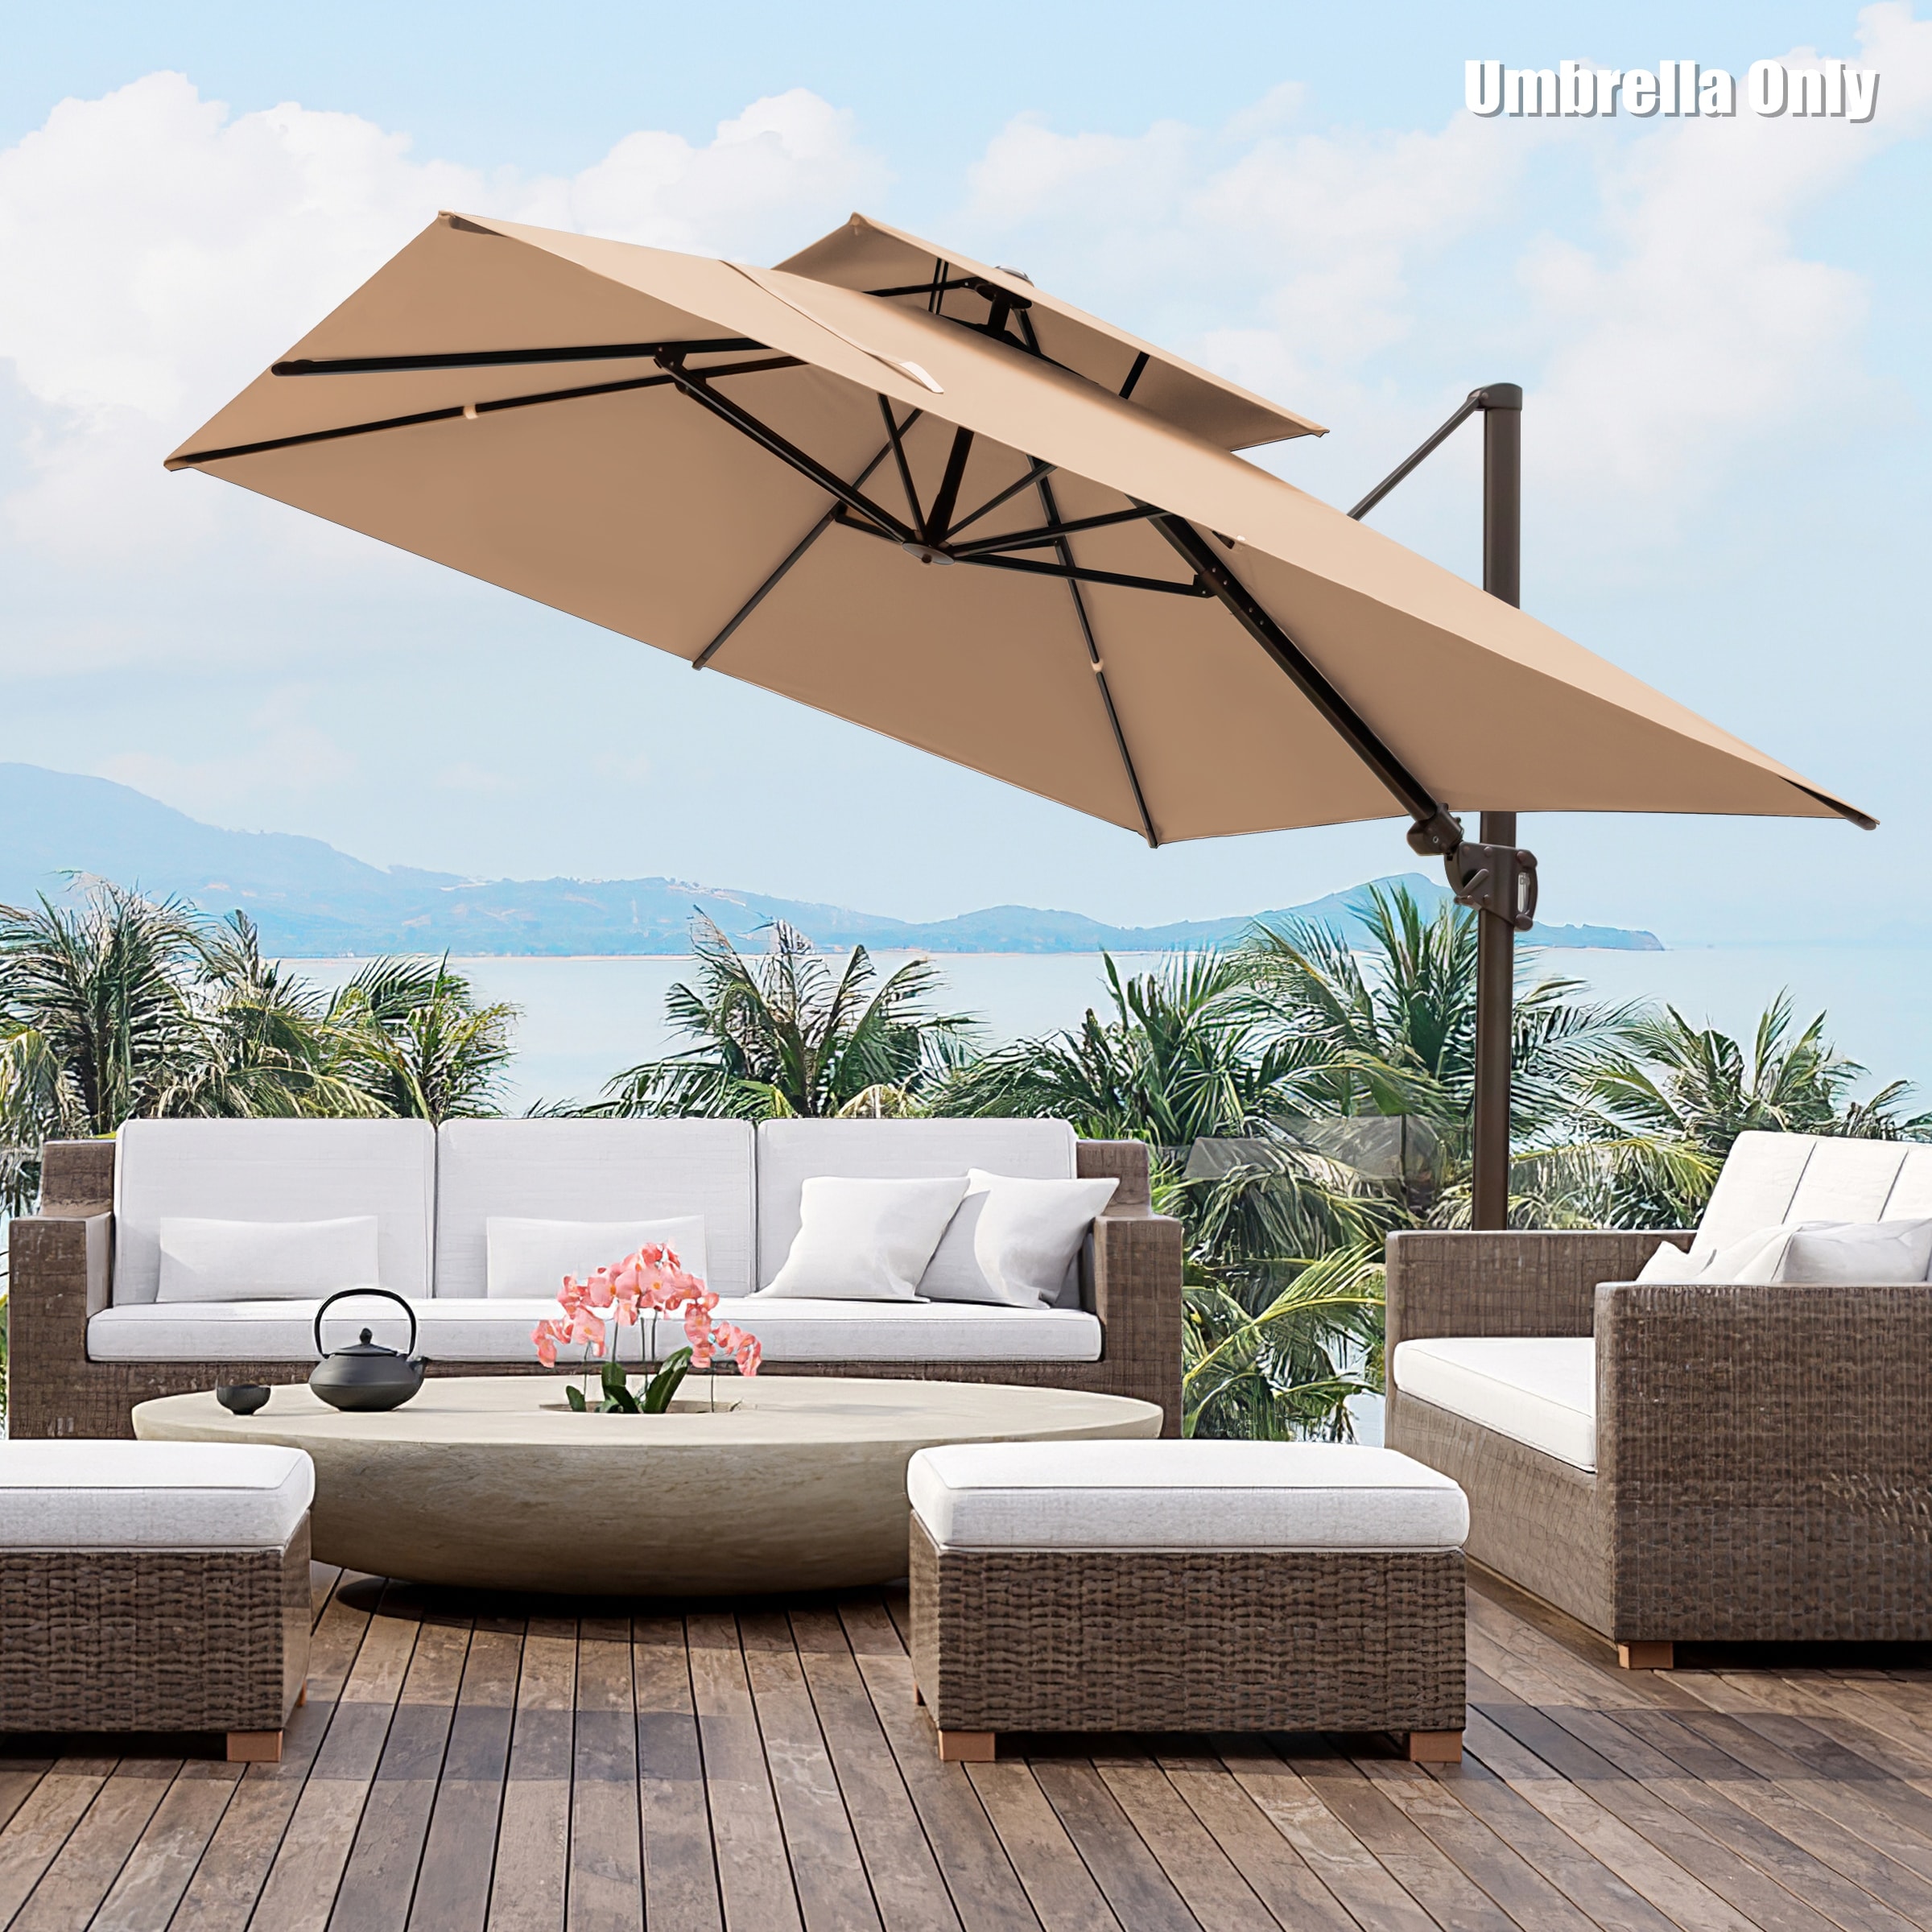 Outdoor 10 X 10 Ft Square Double Top Patio Cantilever Offset Umbrella On Sale Overstock